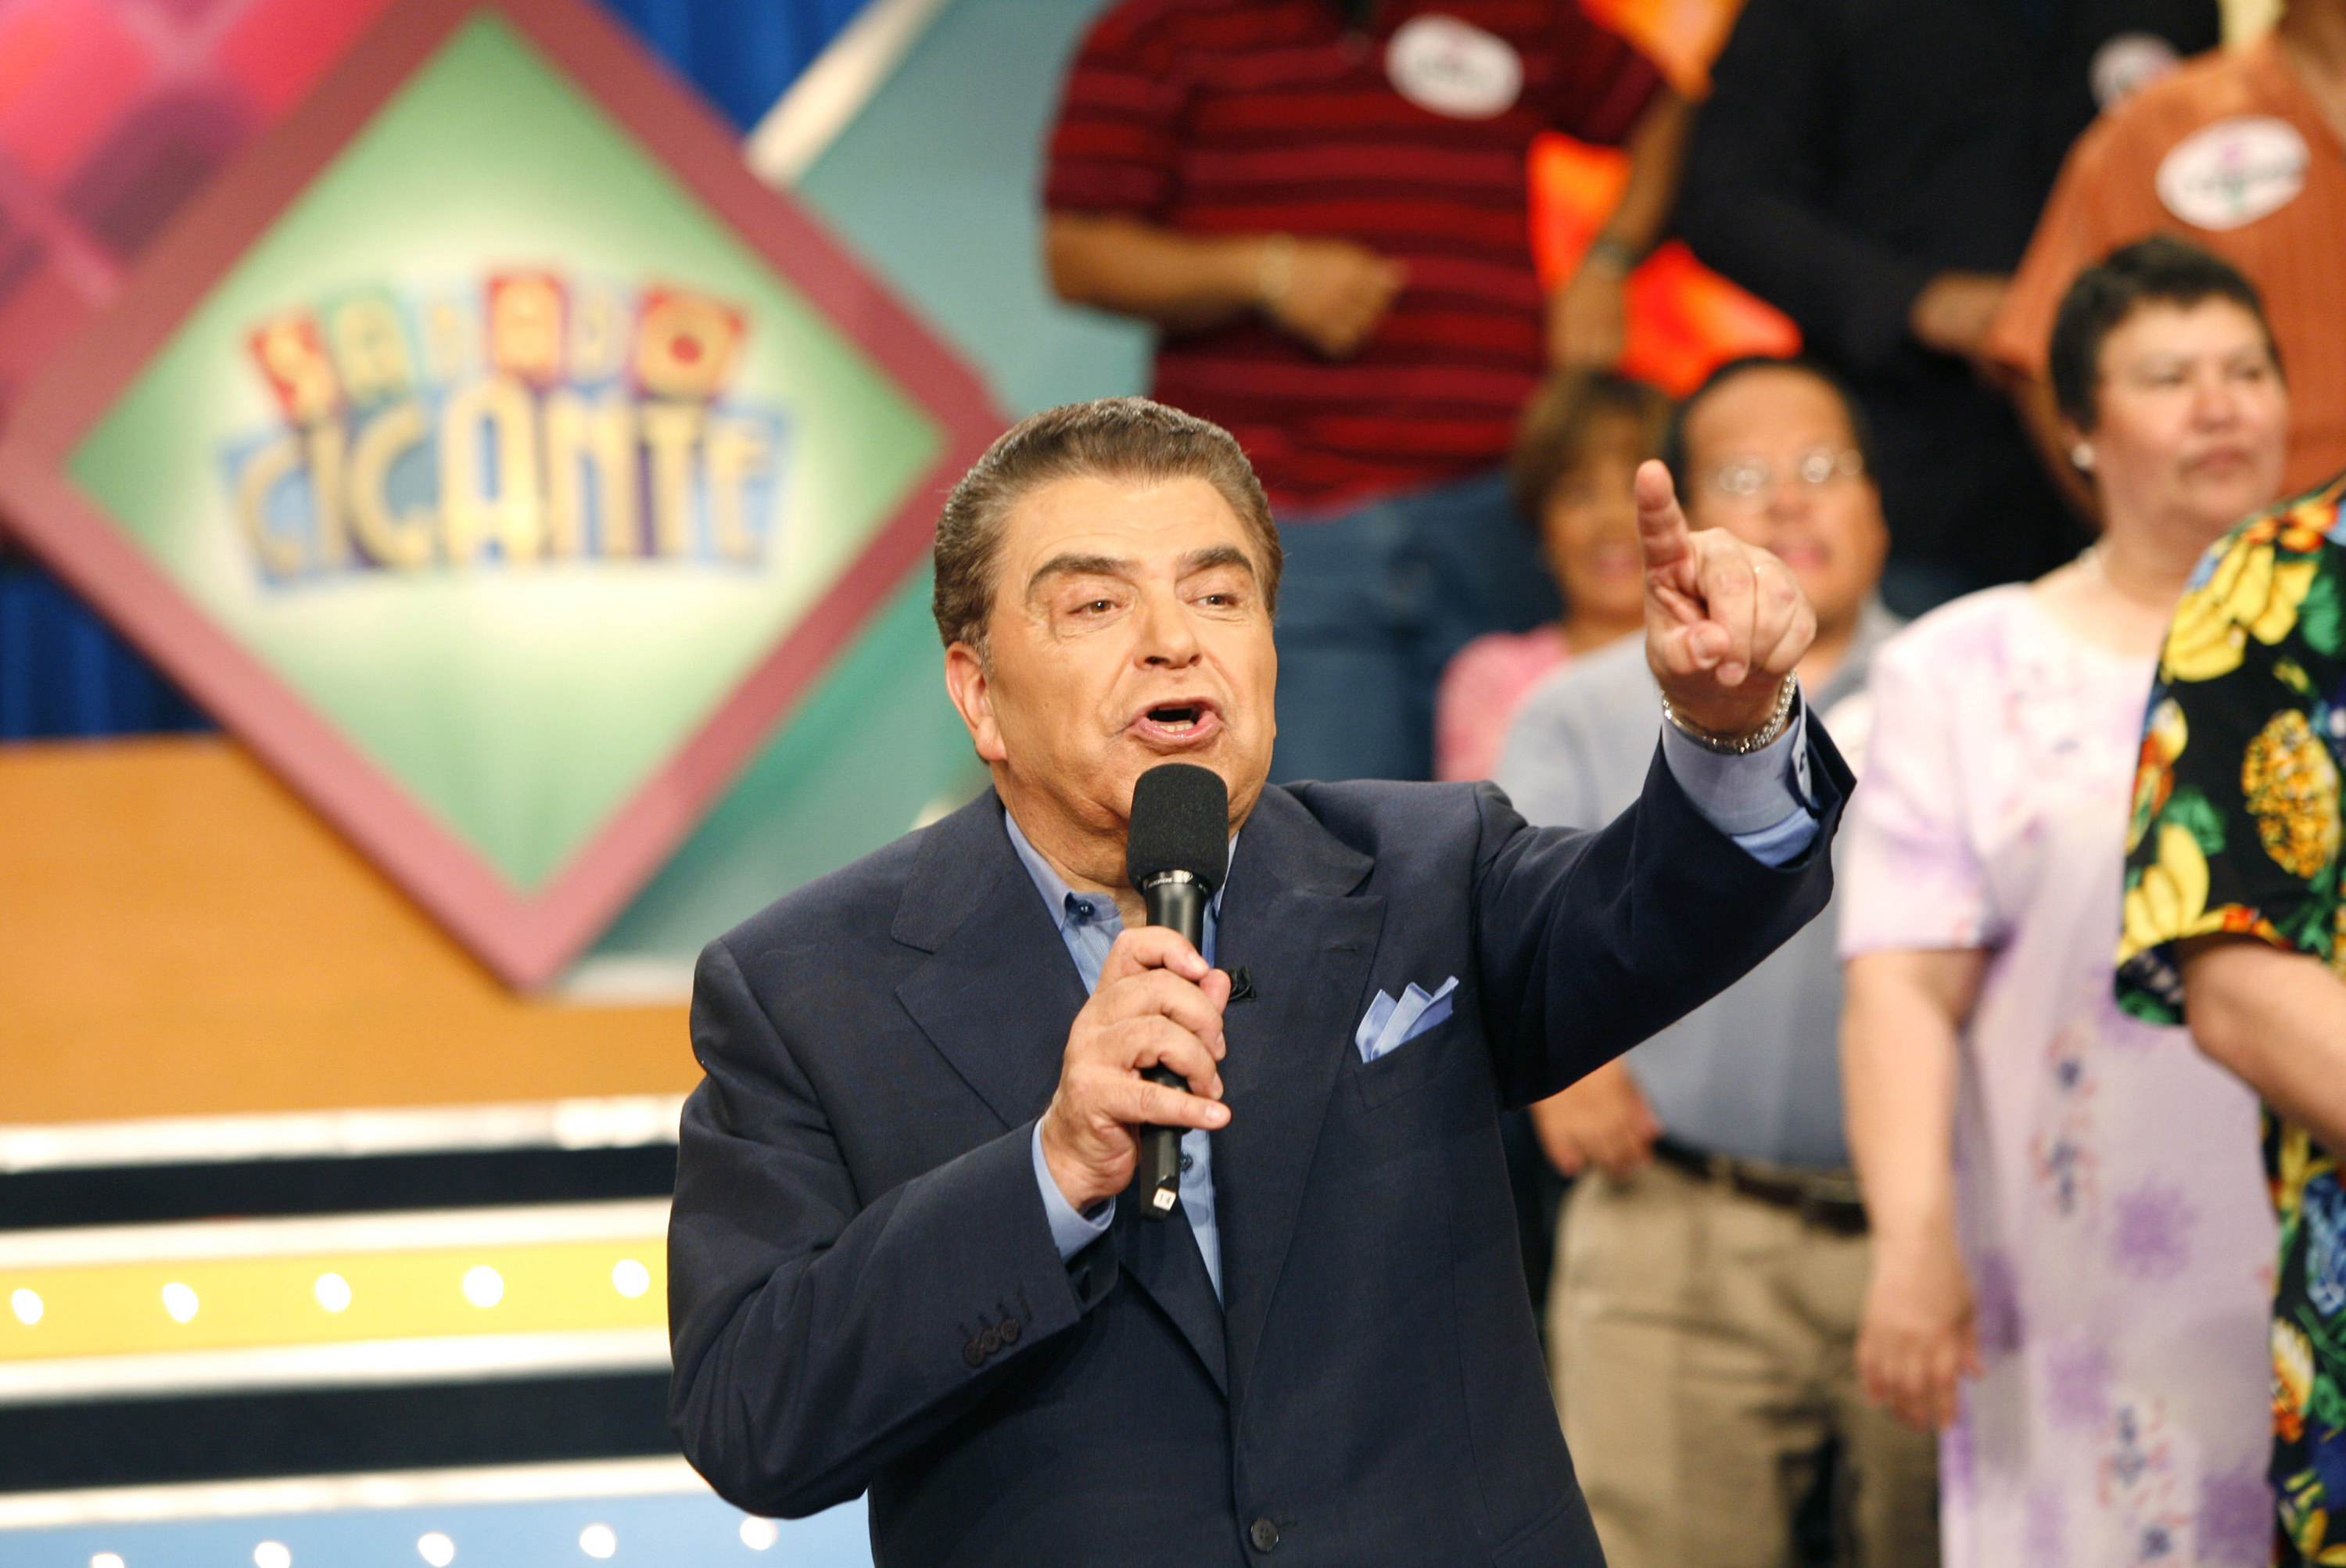 Don Francisco talking into a microphone